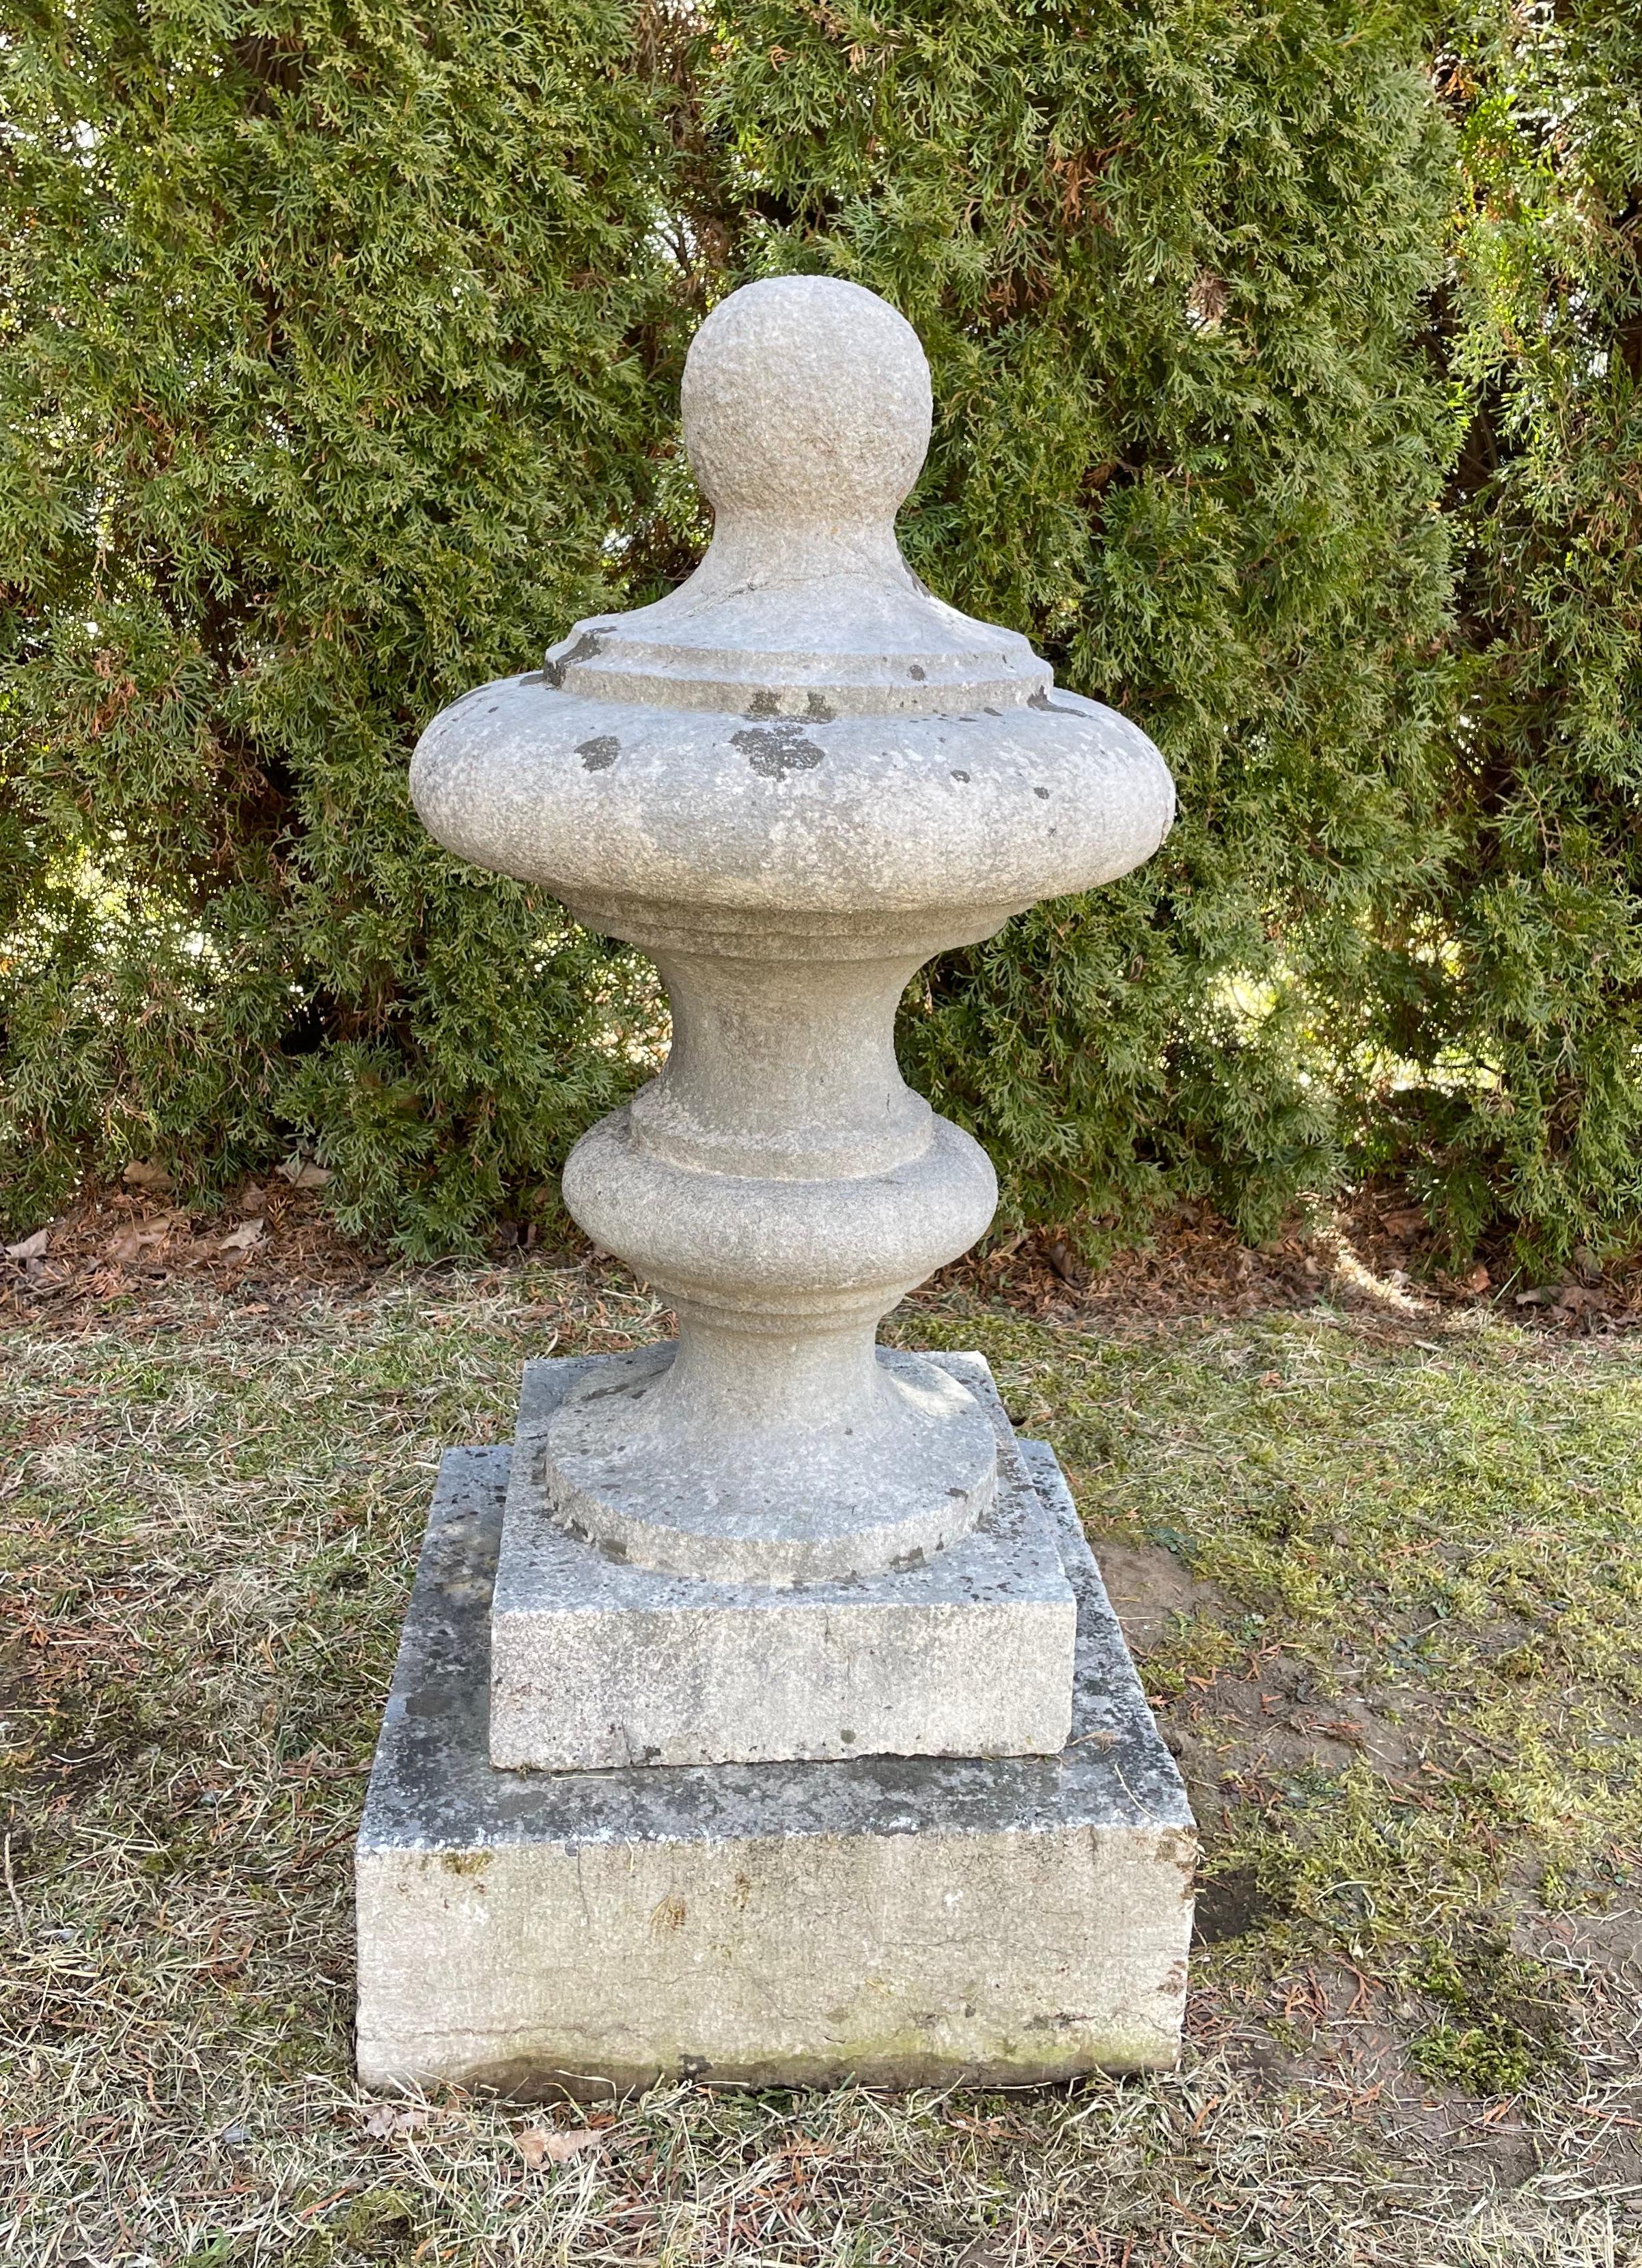 We bought this hand-carved bluestone finial along with four massive flame ones and it once graced a private castle just outside of Nemur, Belgium. Pale gray in color with a lightly lichened surface and with an elegant urn-form, it makes a stunning